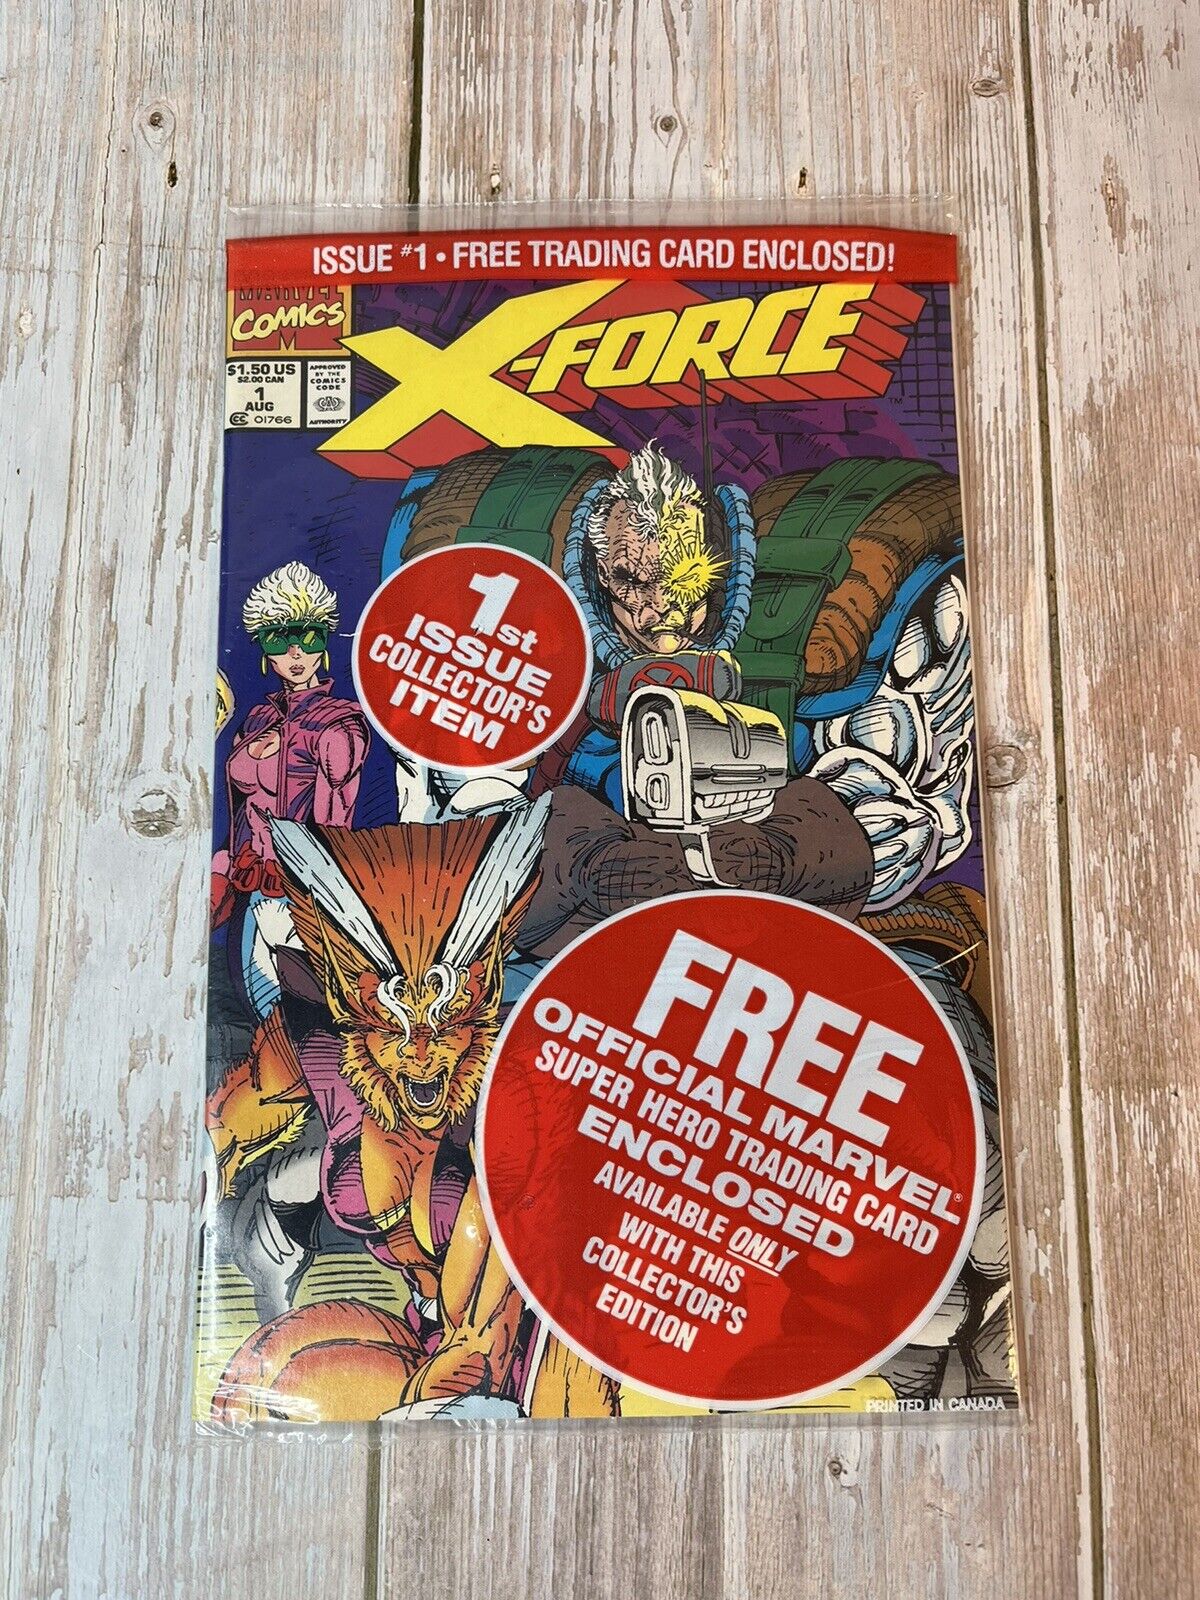 X-FORCE #1 Comic Book Sealed In Bag trading card, Deadpool Domino Cable